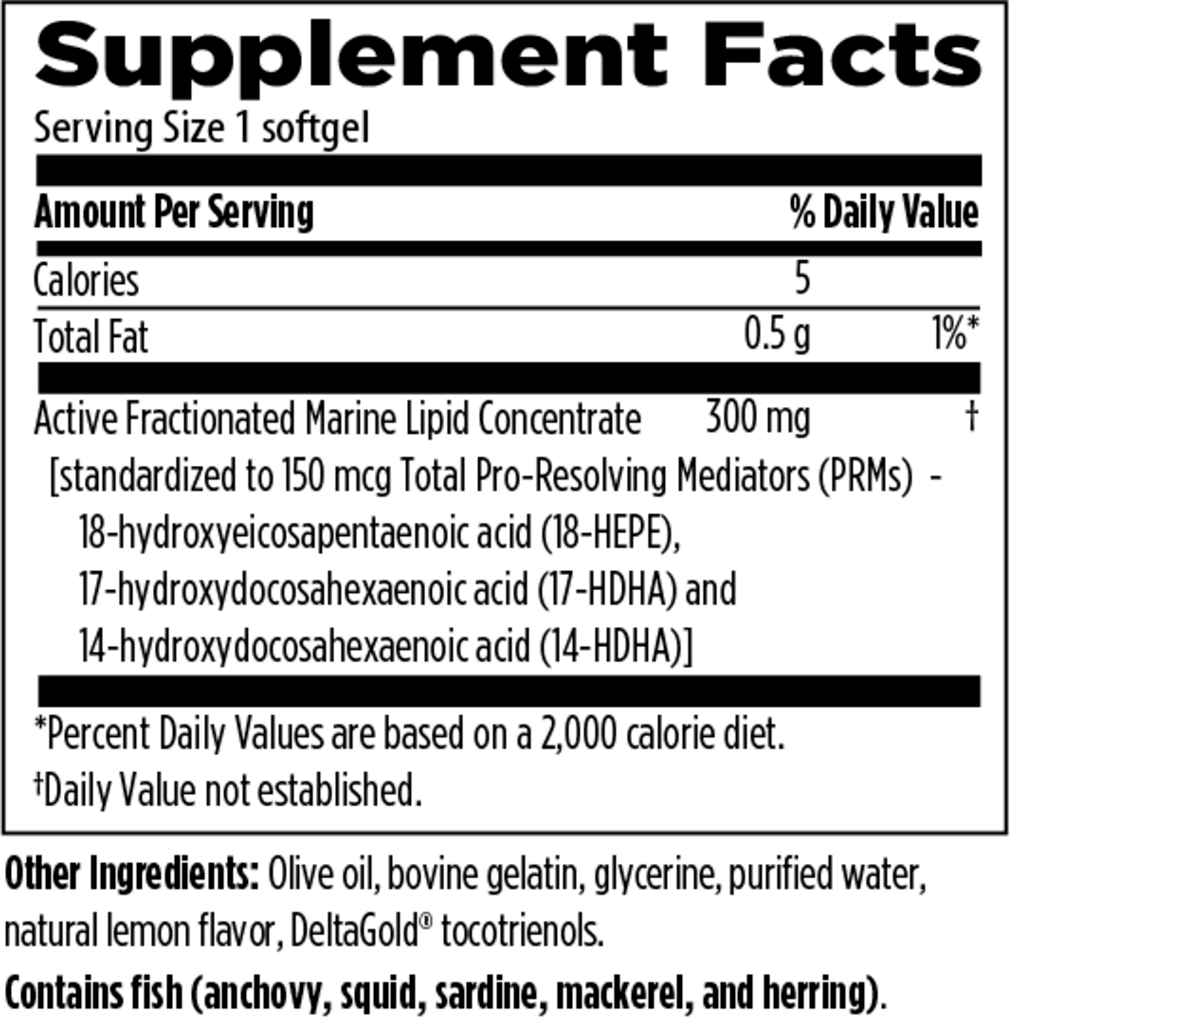 SPM Supreme - 60 softgels Designs for Health Supplement - Conners Clinic